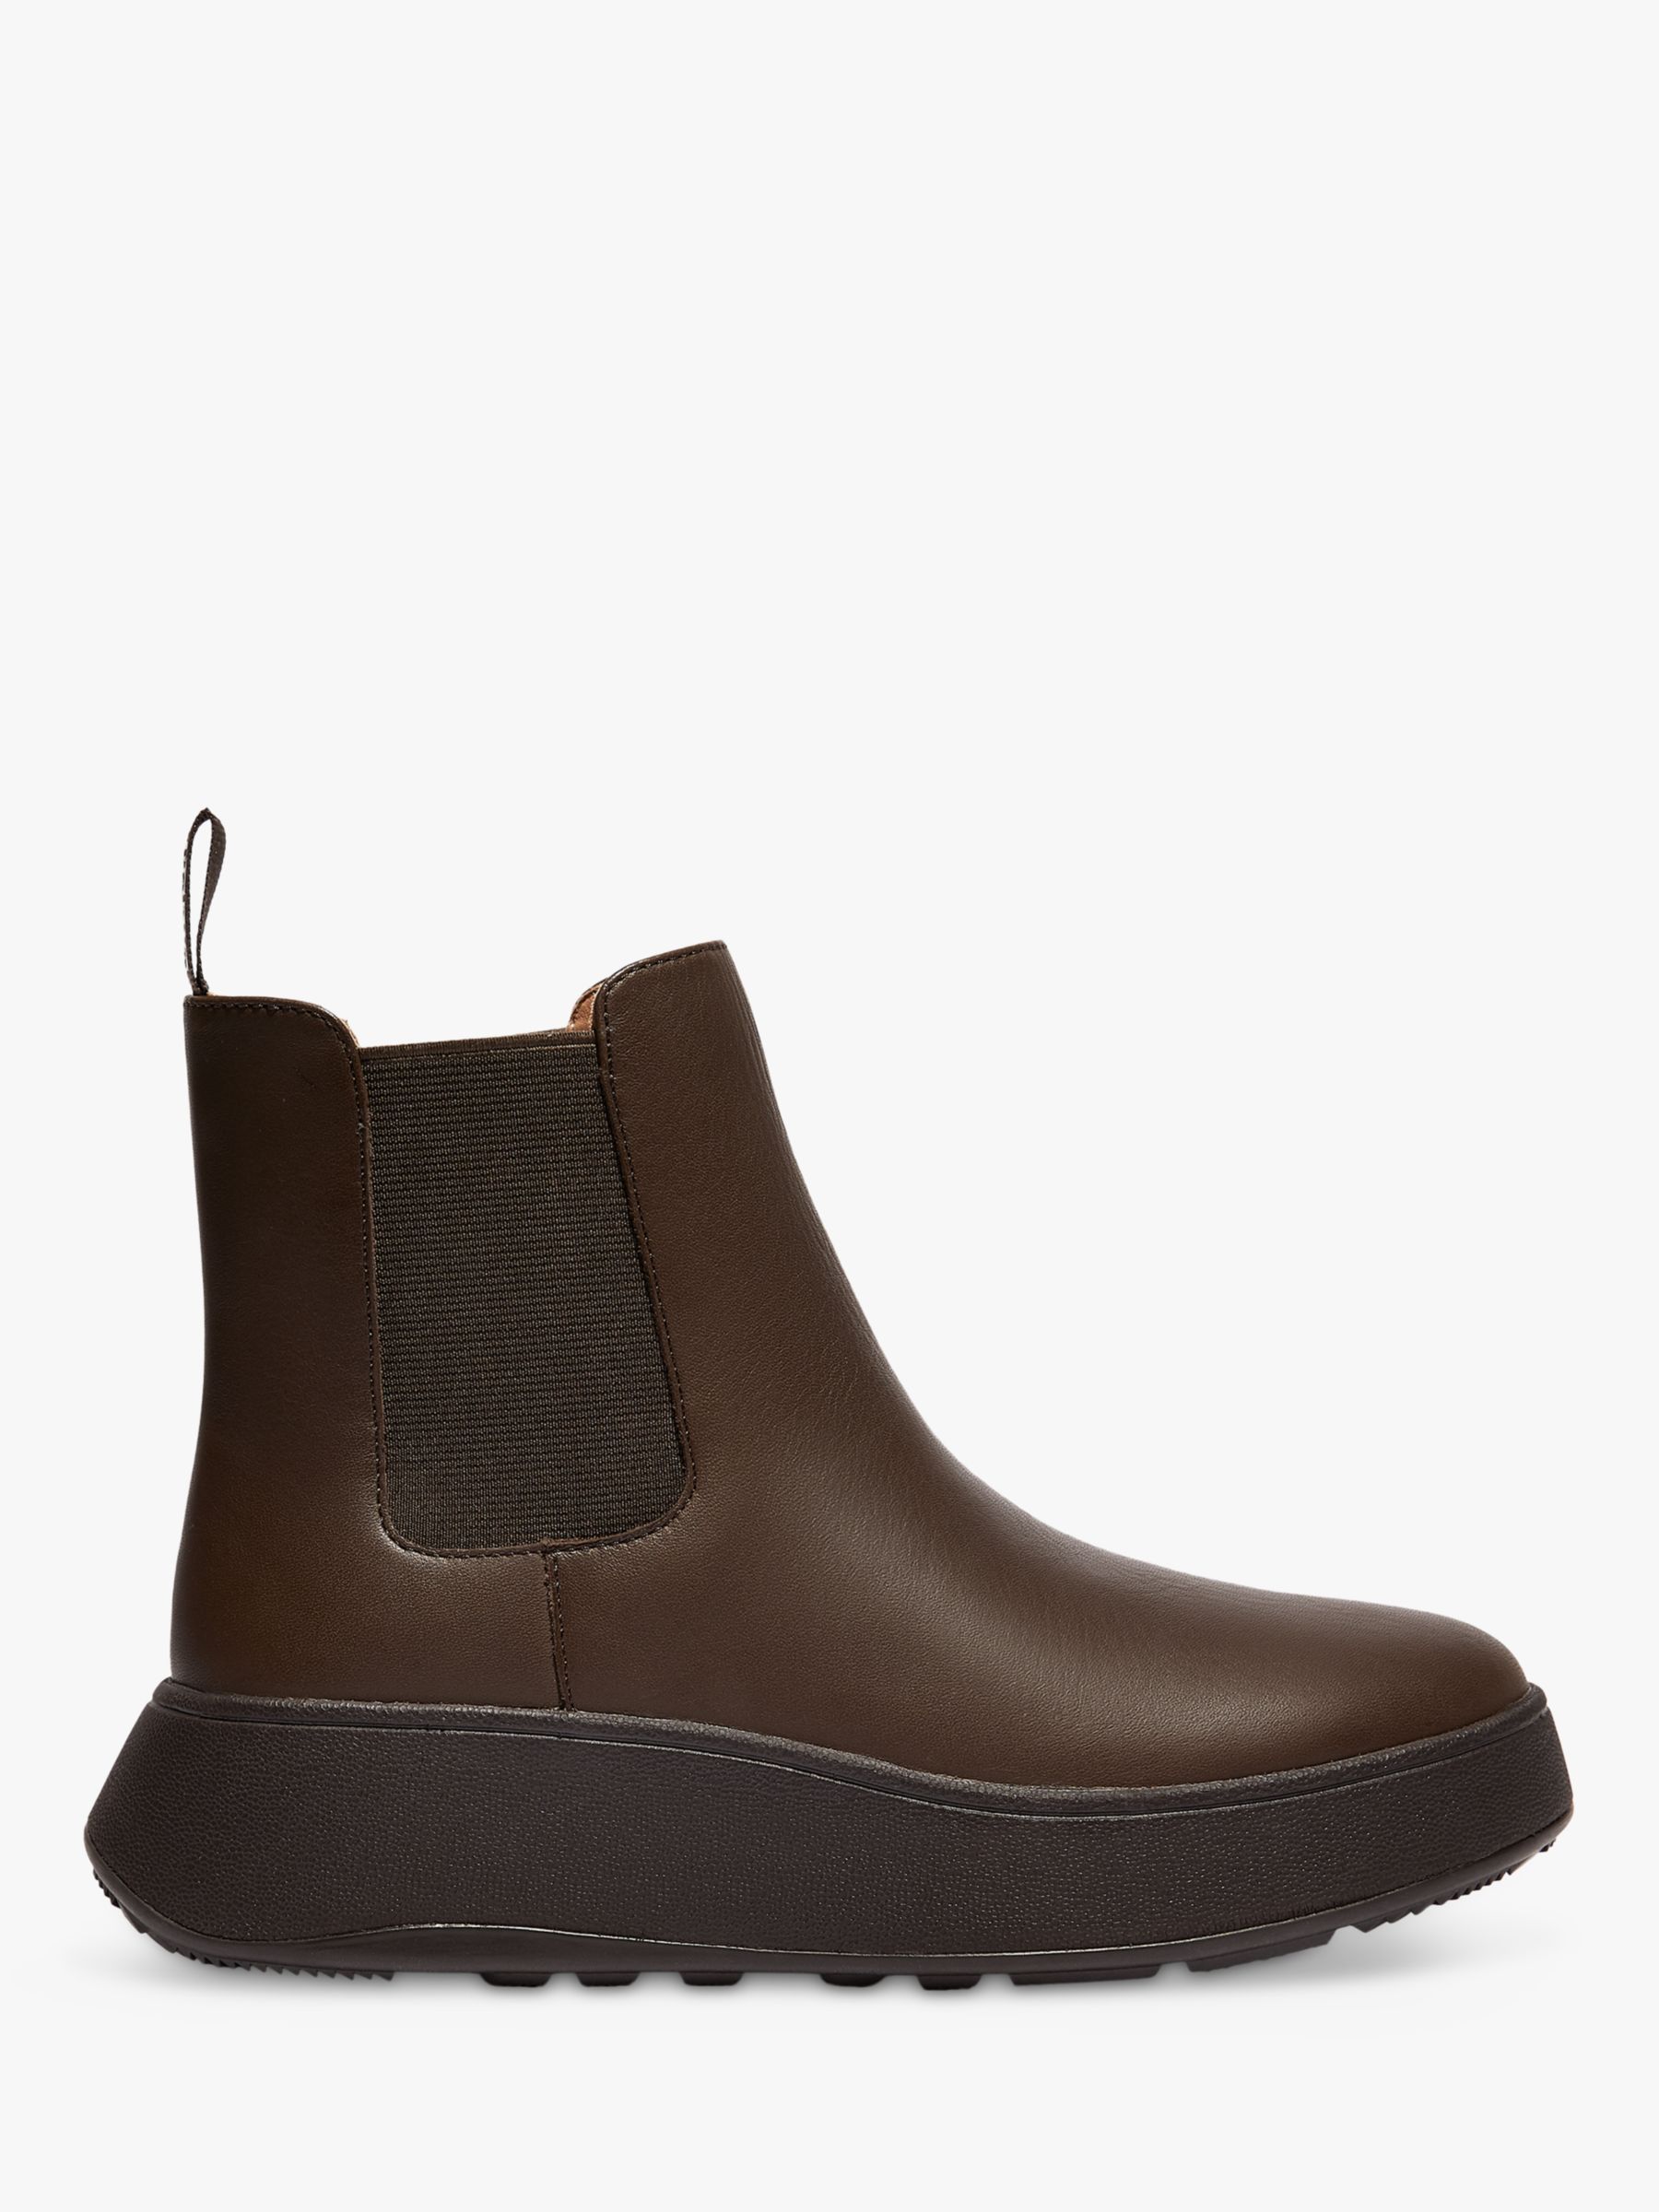 Buy FitFlop Flatform Leather Ankle Boots Online at johnlewis.com